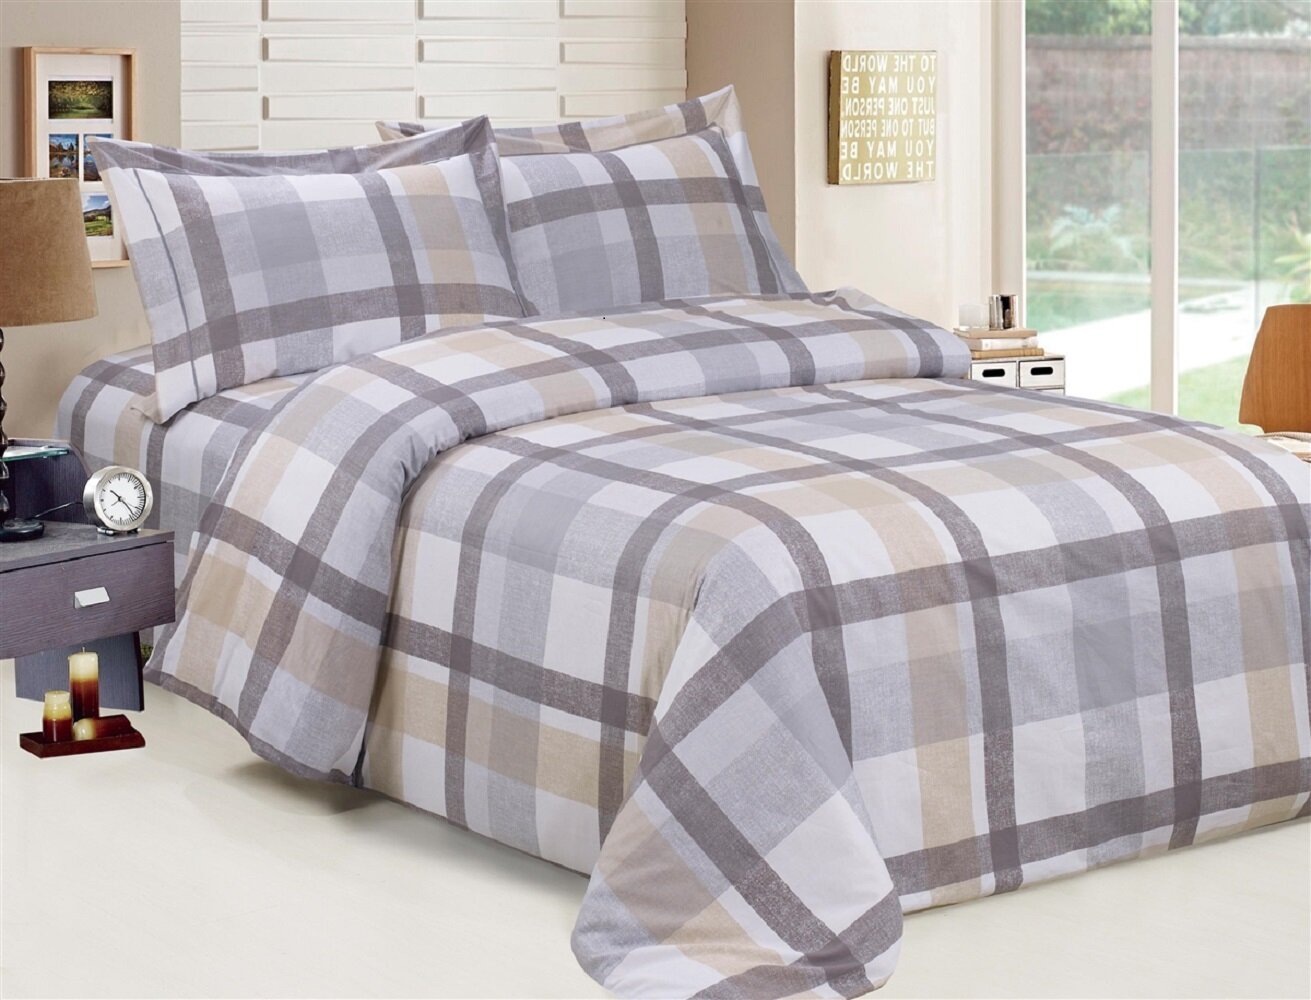 Duvet Covers Bedding Sets Quilt Cover Set With Pillowcases